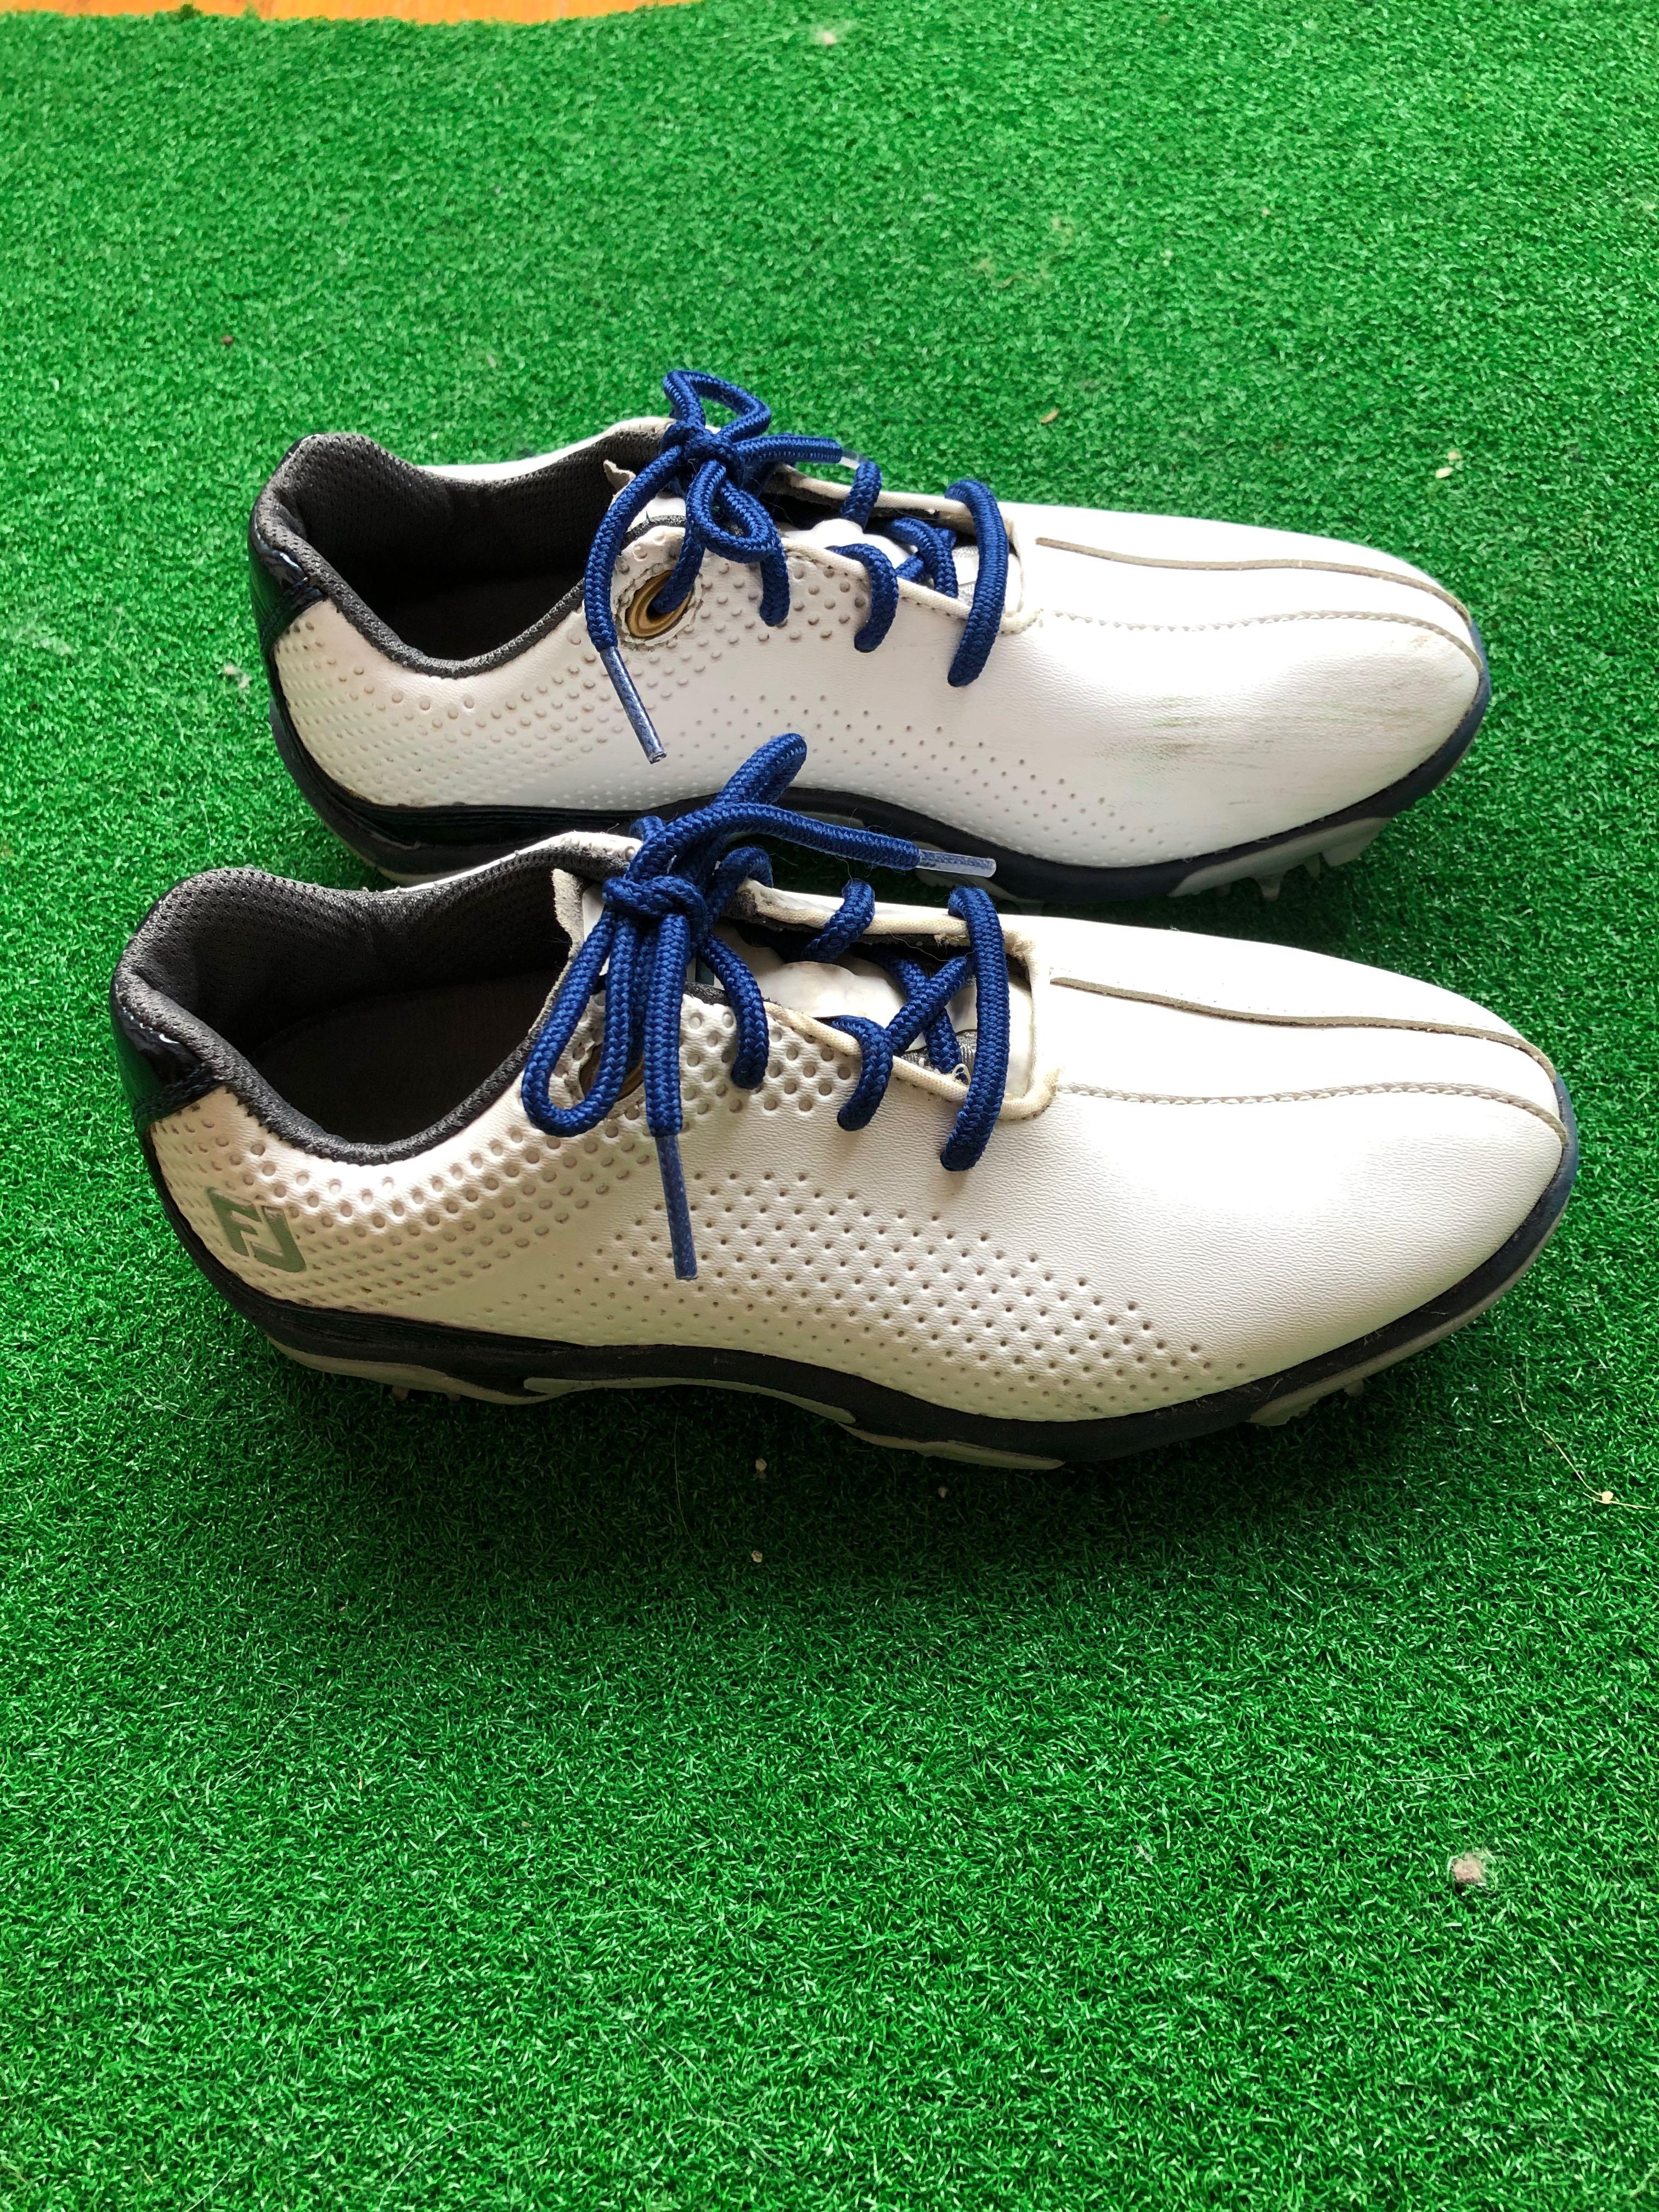 size 18 golf shoes